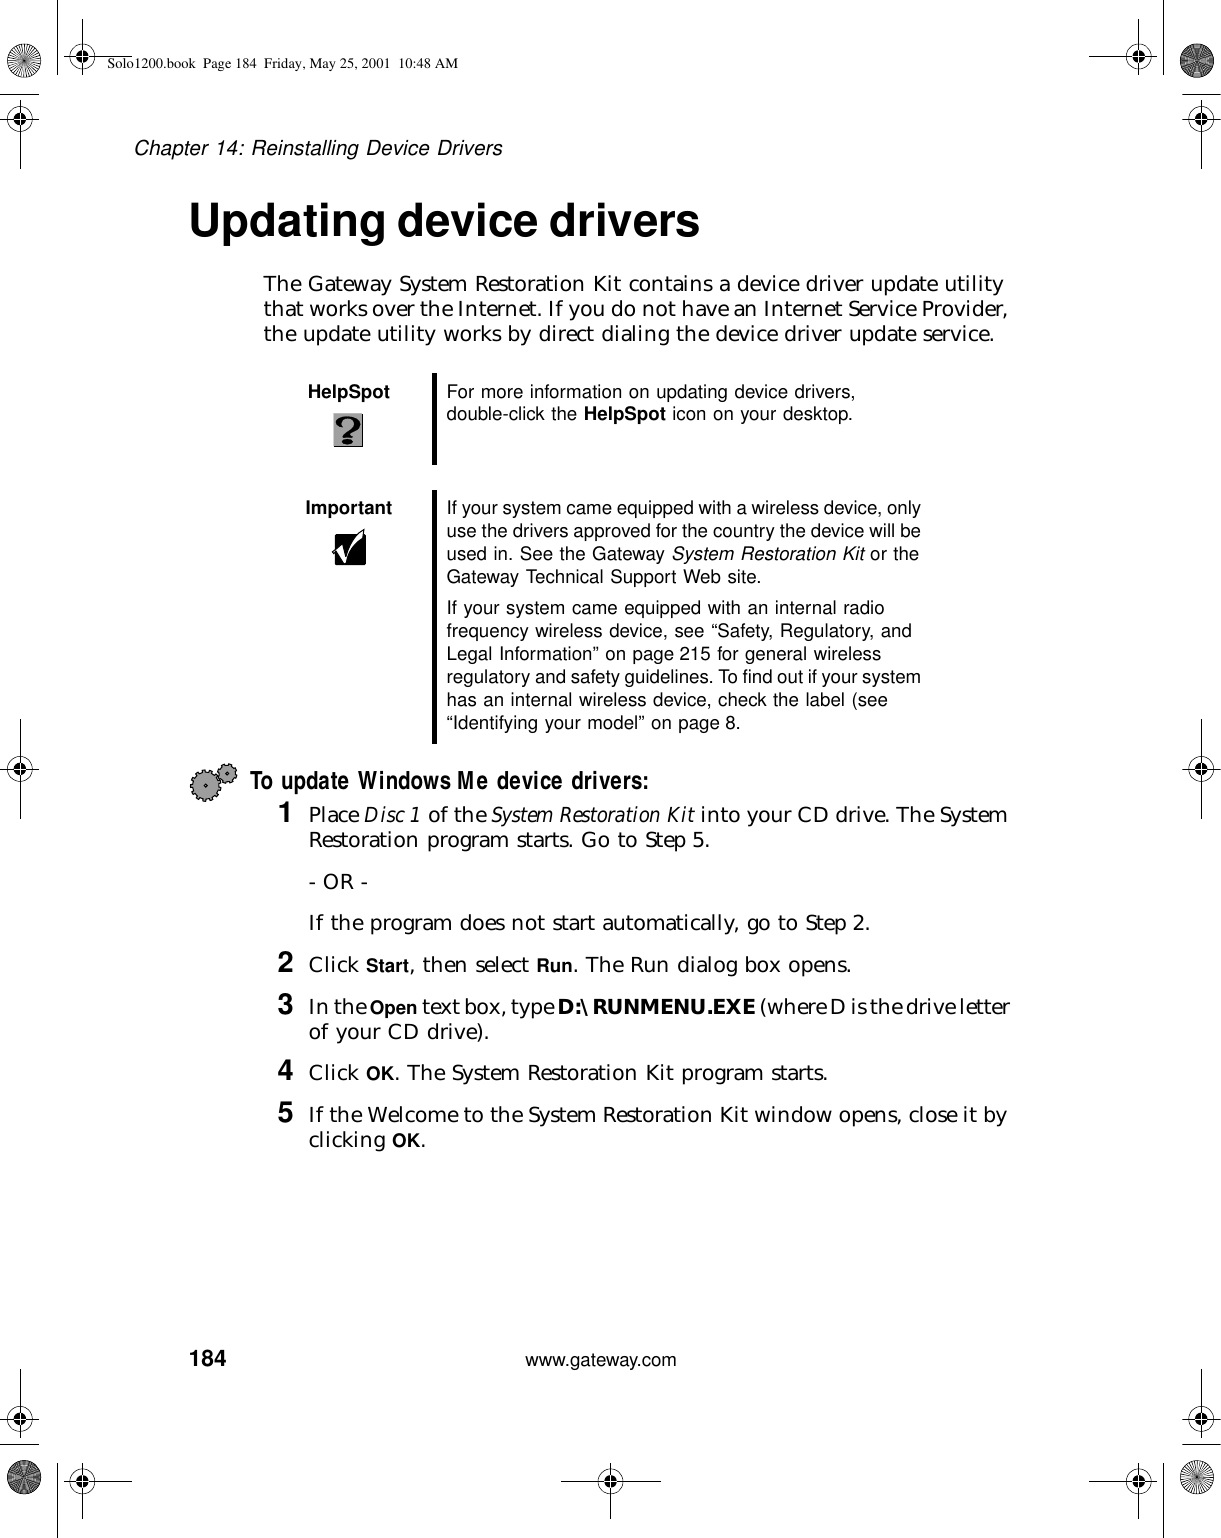 184Chapter 14: Reinstalling Device Driverswww.gateway.comUpdating device driversThe Gateway System Restoration Kit contains a device driver update utility that works over the Internet. If you do not have an Internet Service Provider, the update utility works by direct dialing the device driver update service.To update Windows Me device drivers:1Place Disc 1 of the System Restoration Kit into your CD drive. The System Restoration program starts. Go to Step 5.- OR -If the program does not start automatically, go to Step 2.2Click Start, then select Run. The Run dialog box opens.3In the Open text box, type D:\RUNMENU.EXE (where D is the drive letter of your CD drive).4Click OK. The System Restoration Kit program starts.5If the Welcome to the System Restoration Kit window opens, close it by clicking OK.HelpSpot For more information on updating device drivers, double-click the HelpSpot icon on your desktop.Important If your system came equipped with a wireless device, only use the drivers approved for the country the device will be used in. See the Gateway System Restoration Kit or the Gateway Technical Support Web site.If your system came equipped with an internal radio frequency wireless device, see “Safety, Regulatory, and Legal Information” on page 215 for general wireless regulatory and safety guidelines. To find out if your system has an internal wireless device, check the label (see “Identifying your model” on page 8.Solo1200.book Page 184 Friday, May 25, 2001 10:48 AM